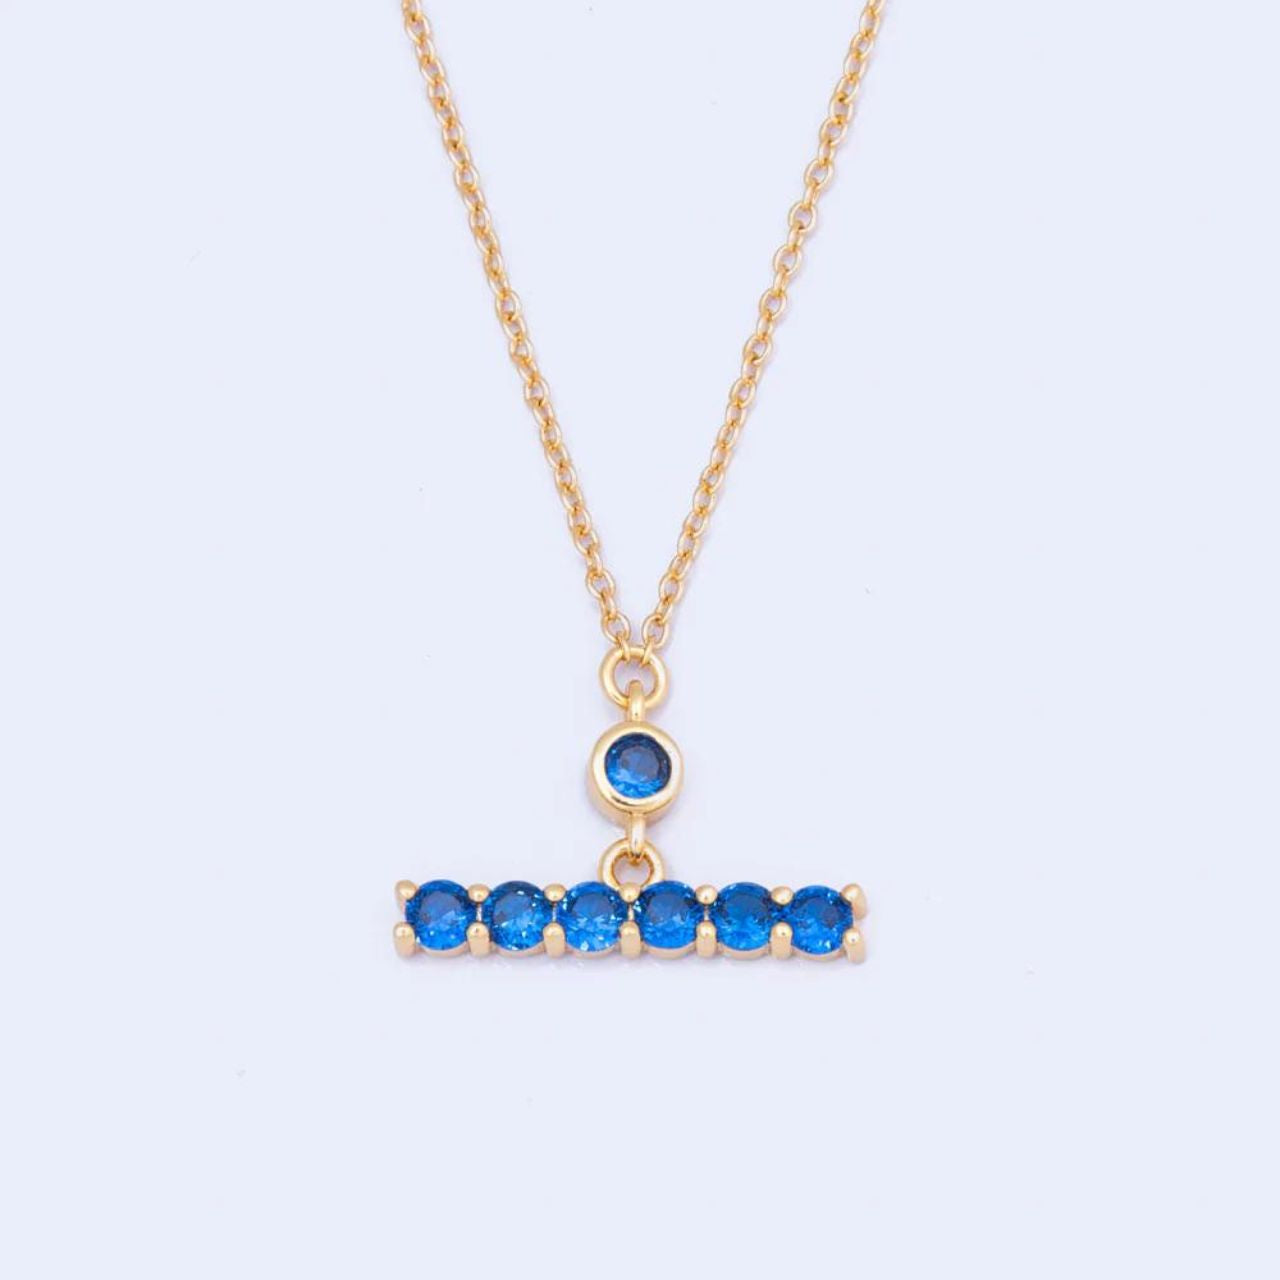 Knight & Day Sapphire T-Bar Necklace  T-Bar necklace embellished with sapphire CZ stones. Gold plating.